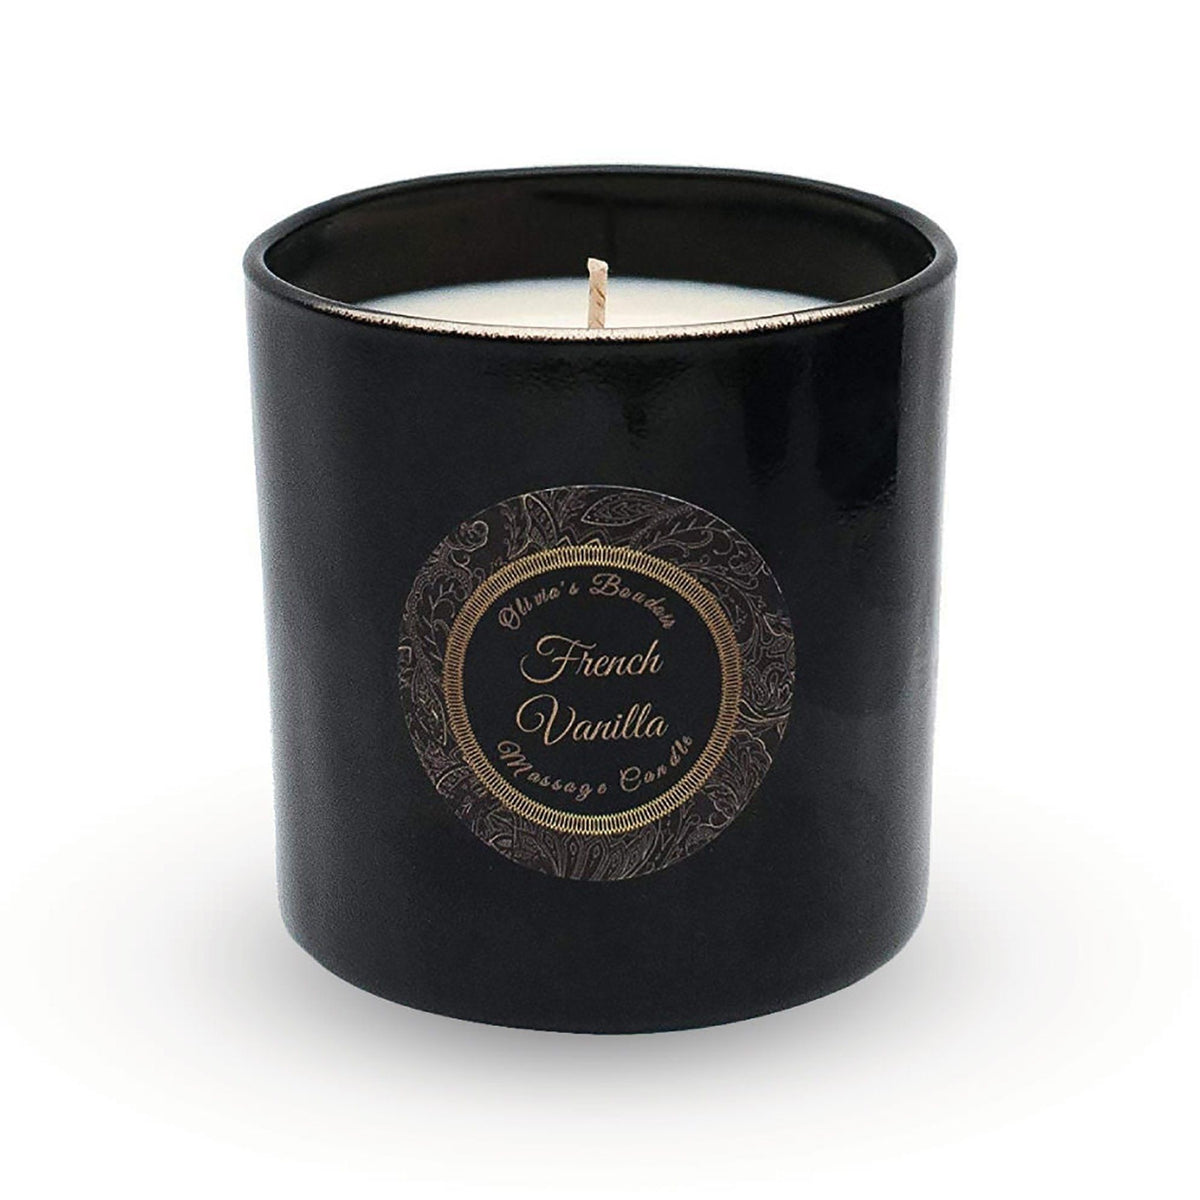 Olivia&#39;s Boudoir French Vanilla Massage Candle at The Cowgirl Shop